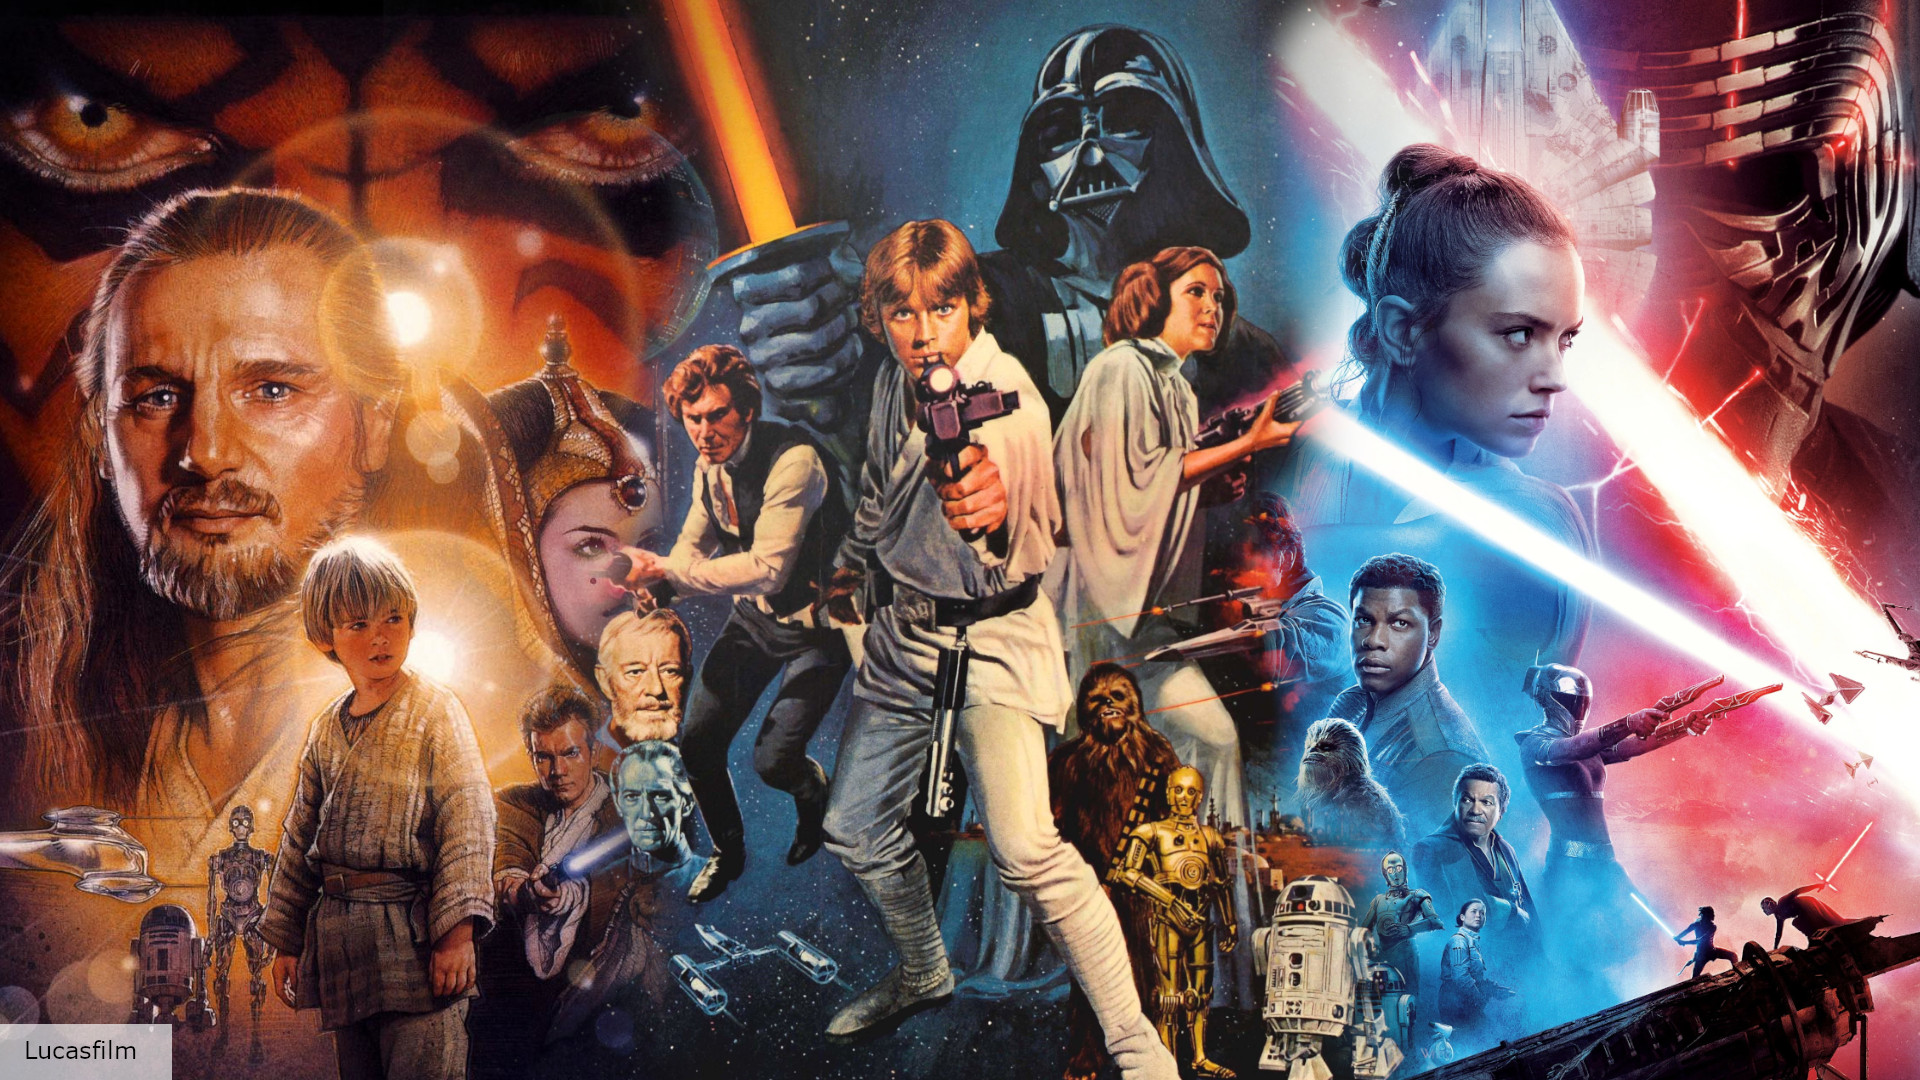 Star Wars in Order: How to Watch Chronologically or by Release Date - IGN